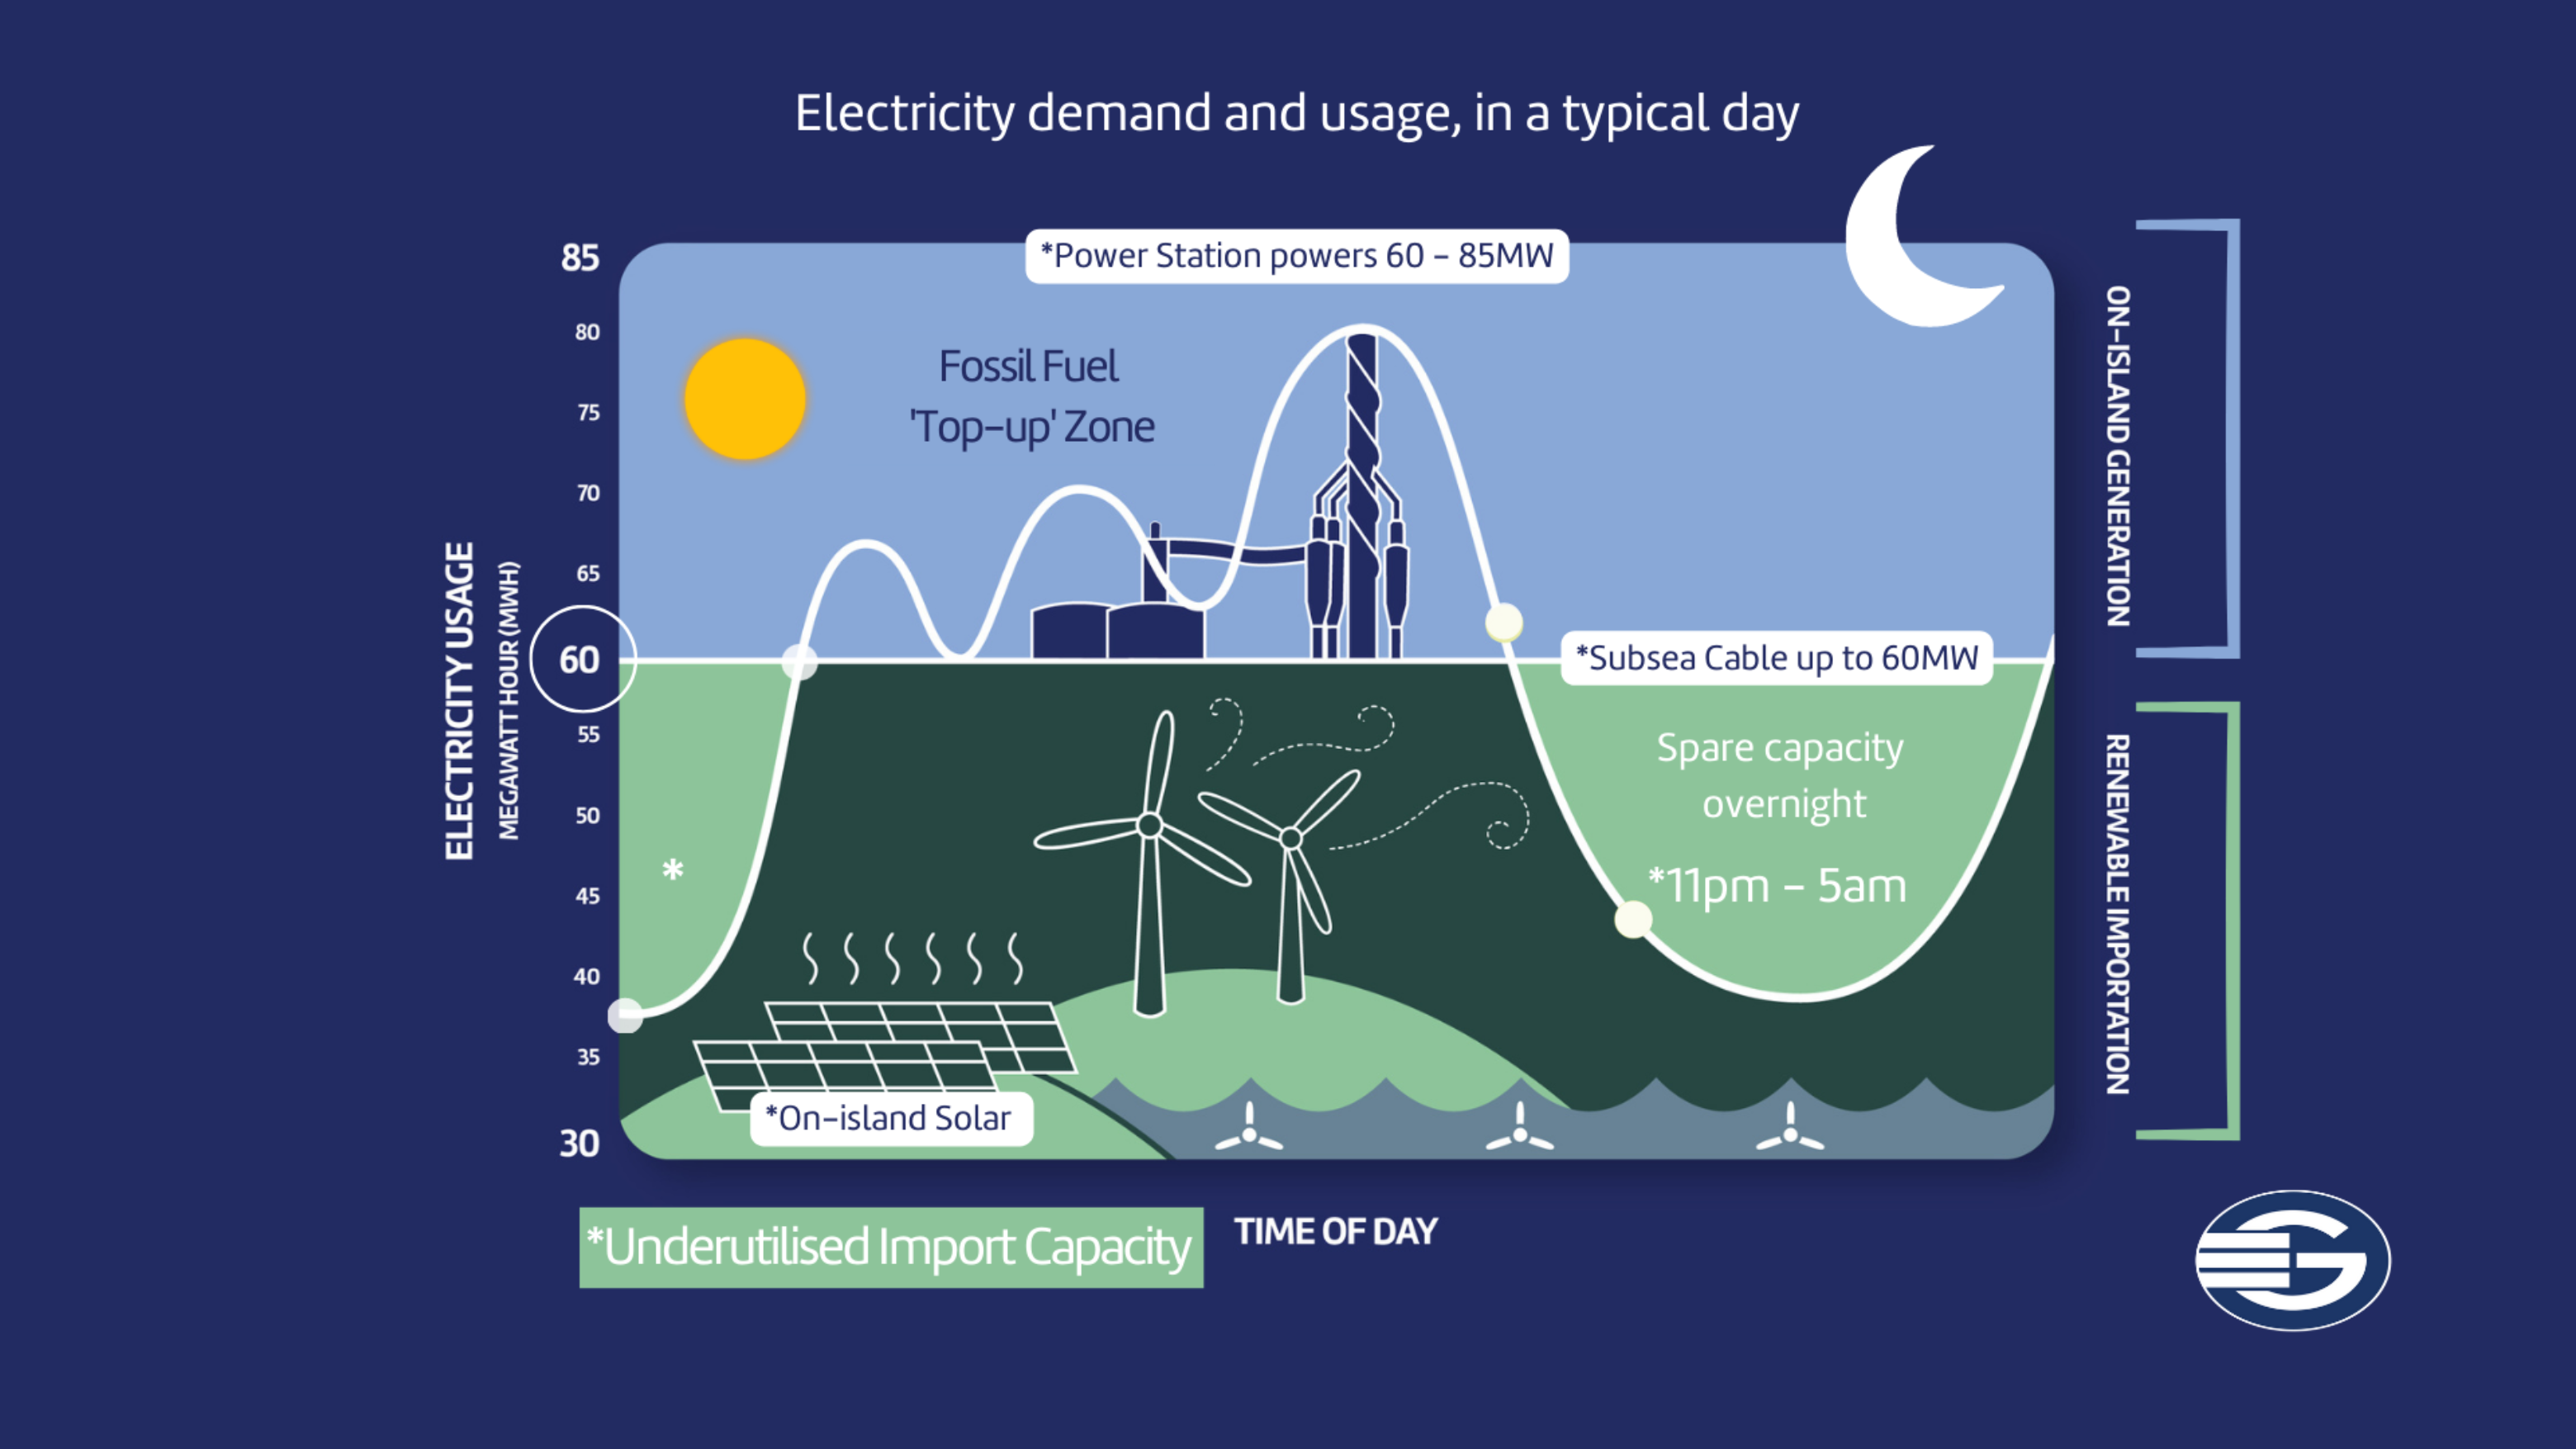 Electricity Demand in a typical day ranges from 30 - 90 Megawatts